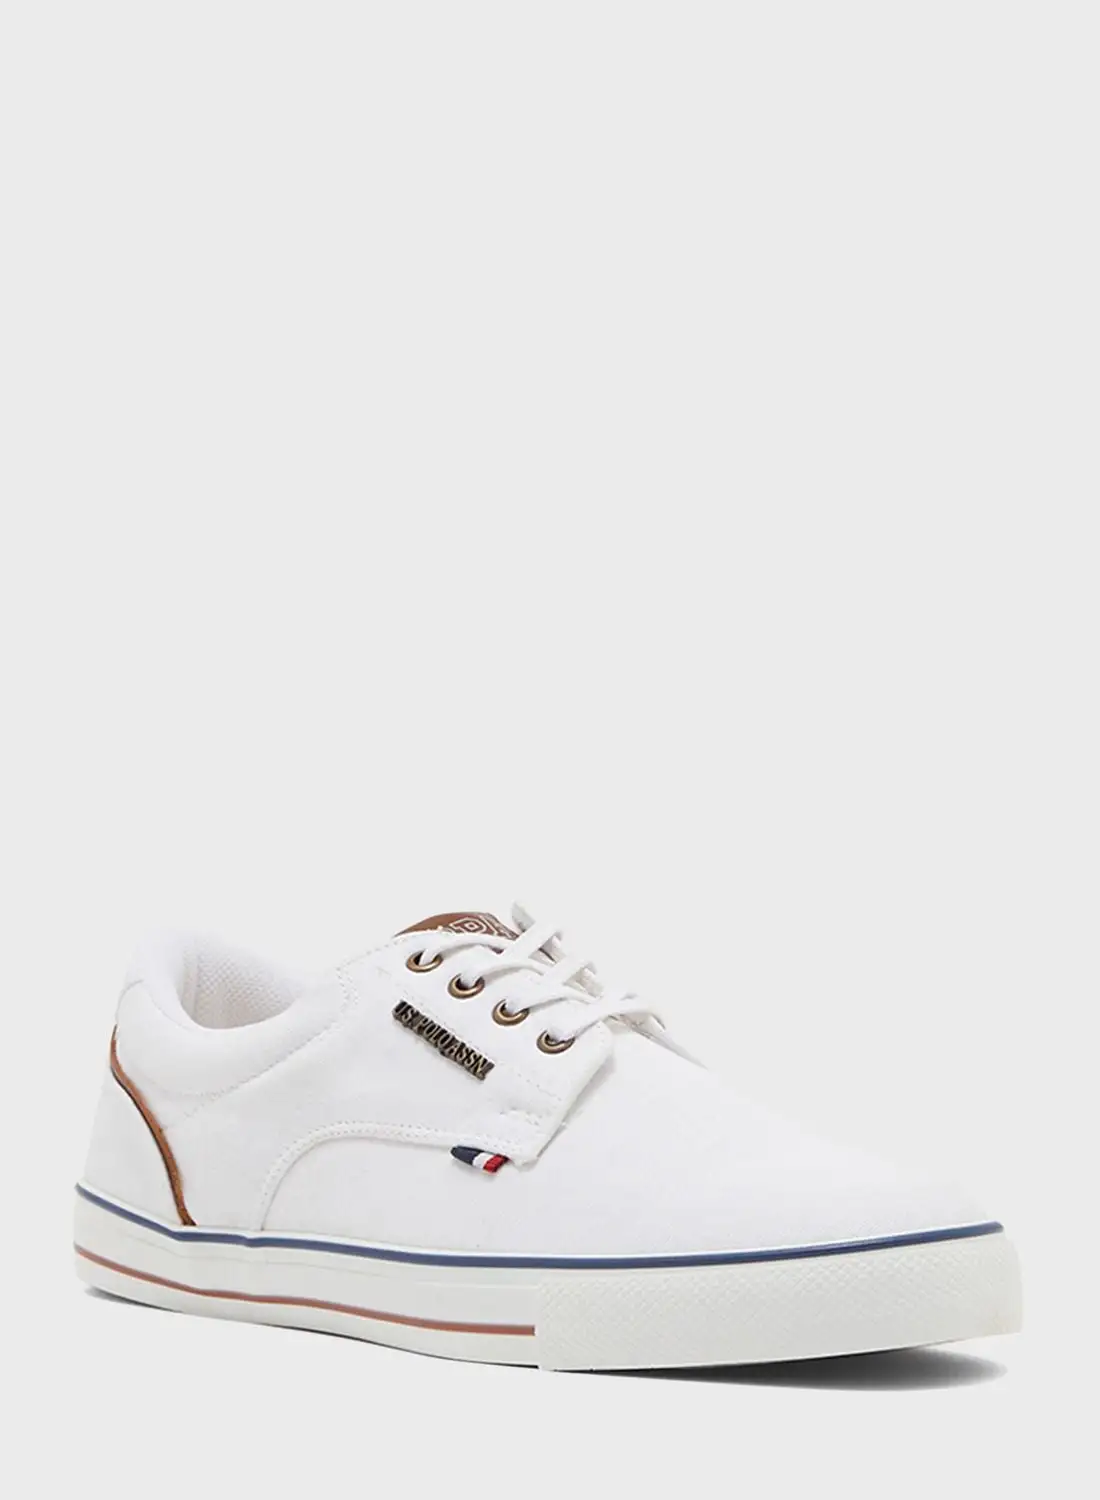 U.S. Polo Assn. Lace Up Low Top Sneakers